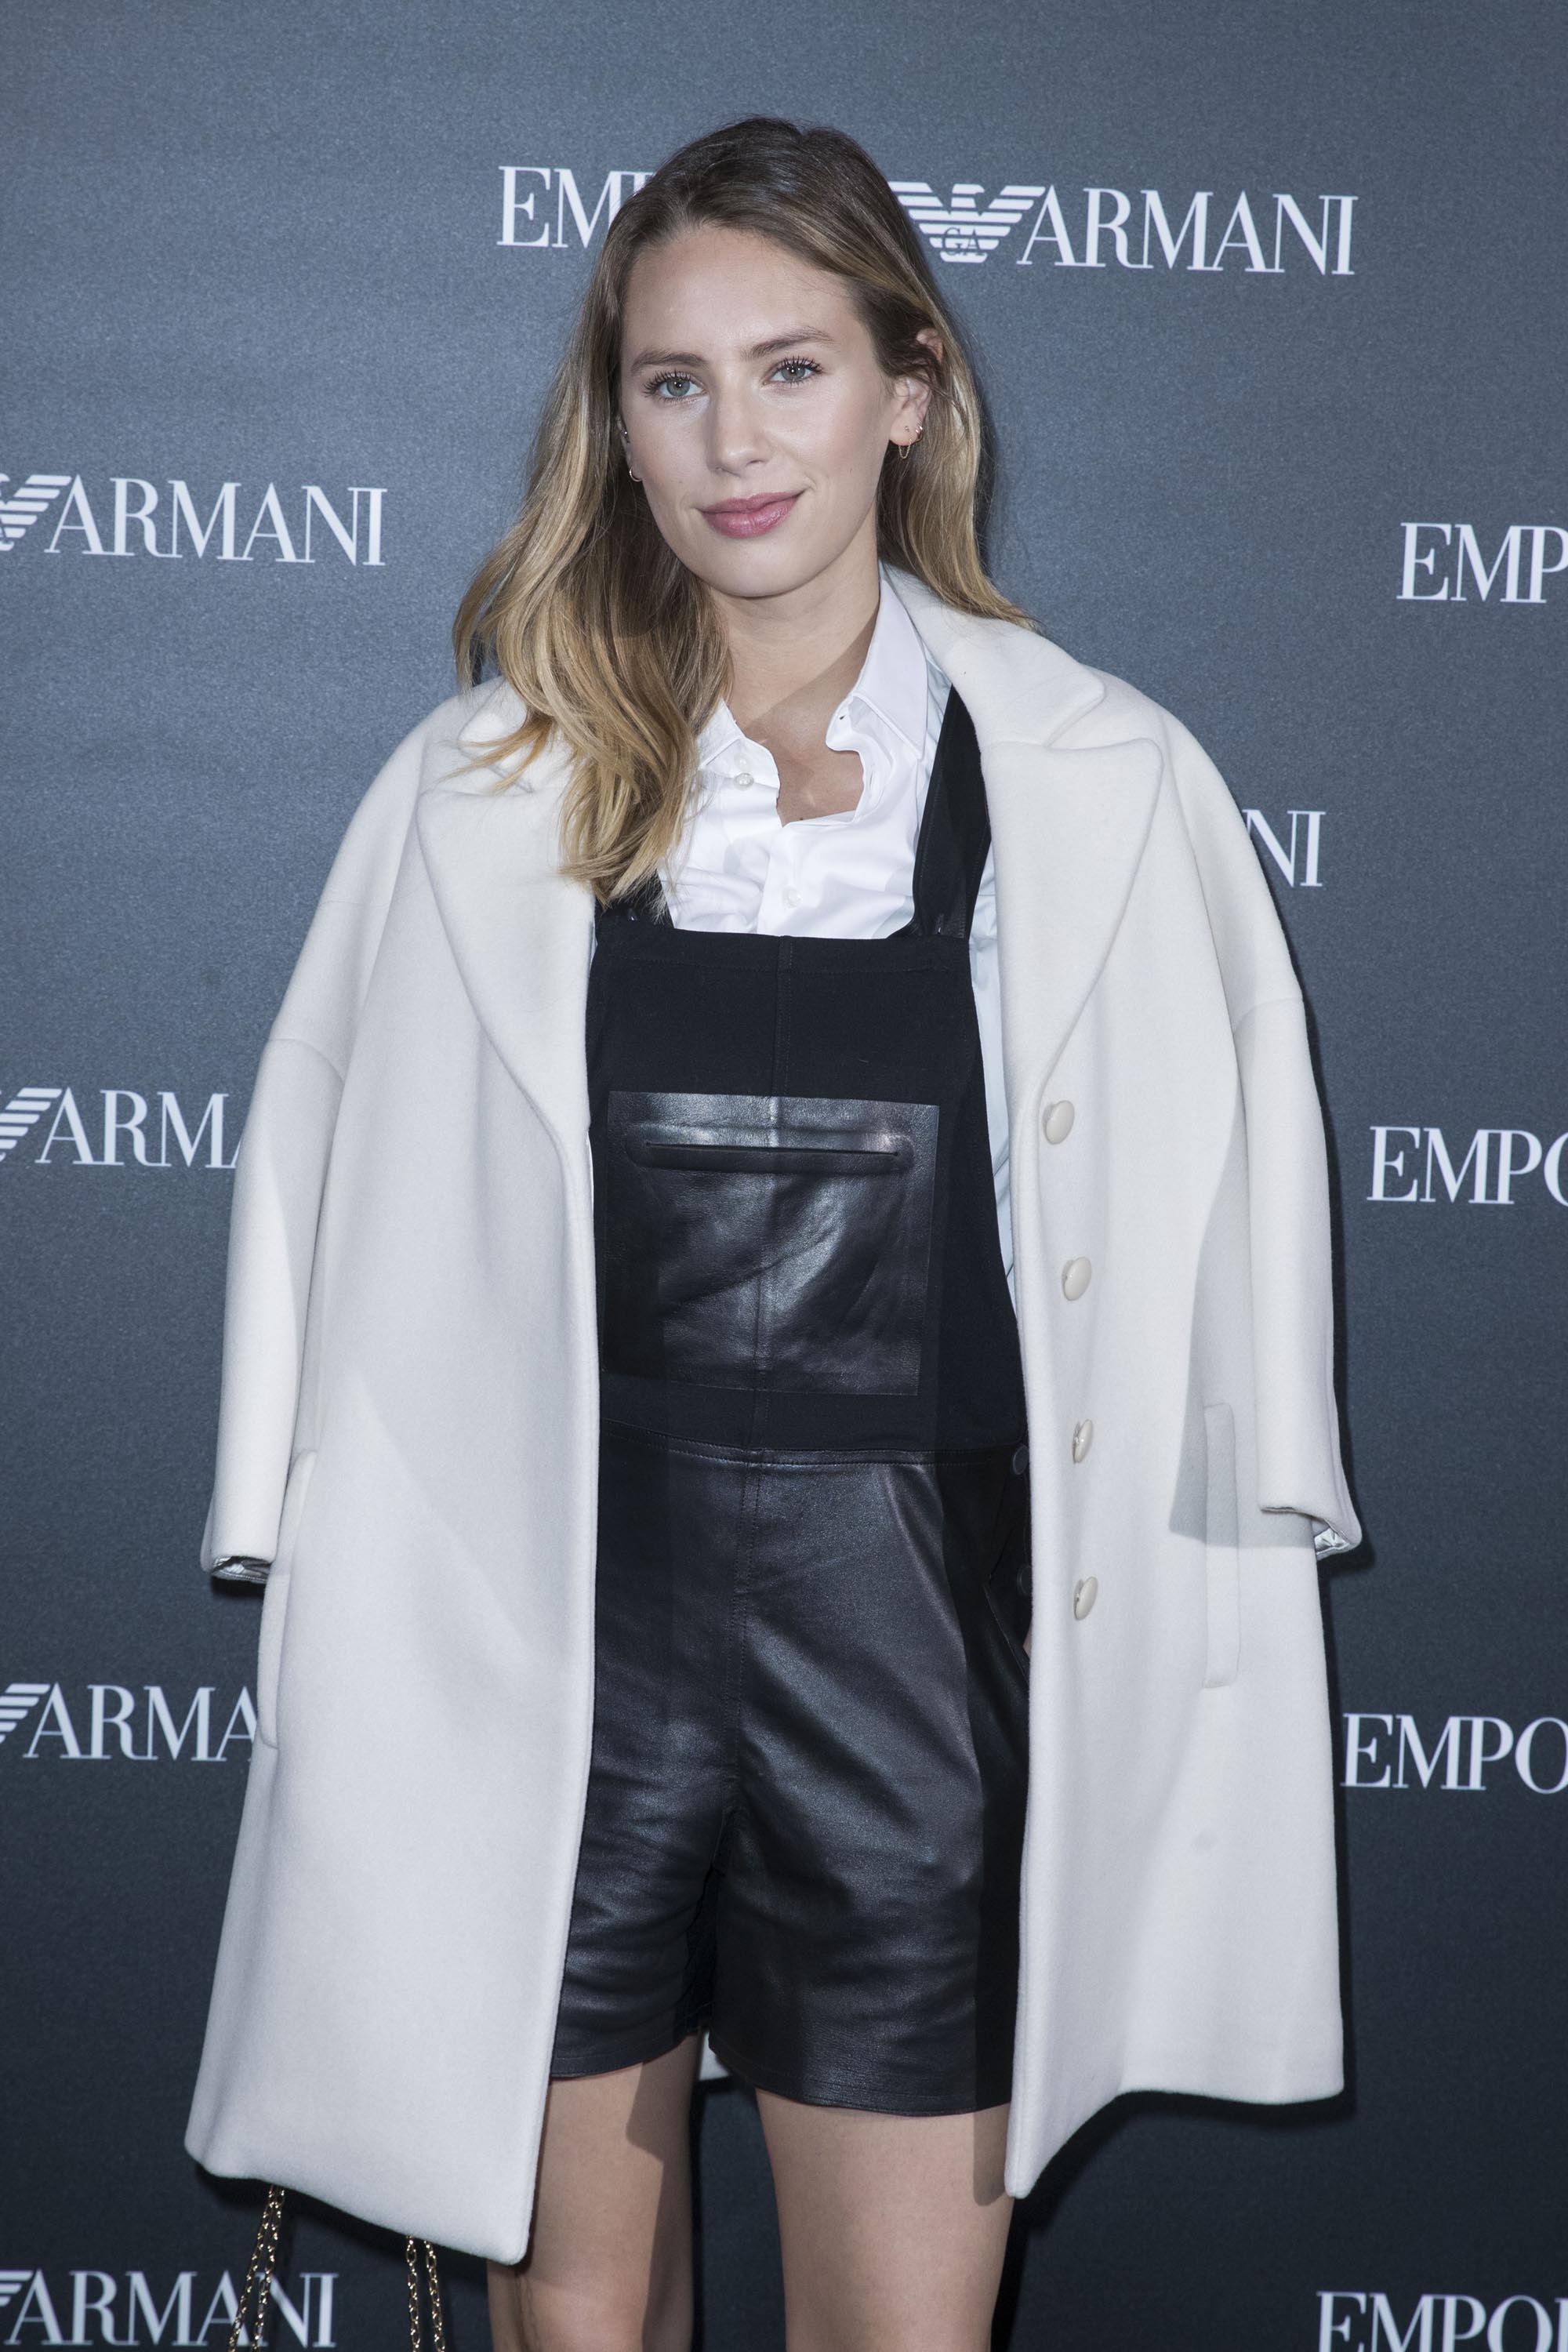 Dylan Frances Penn attends the Emporio Armani Show